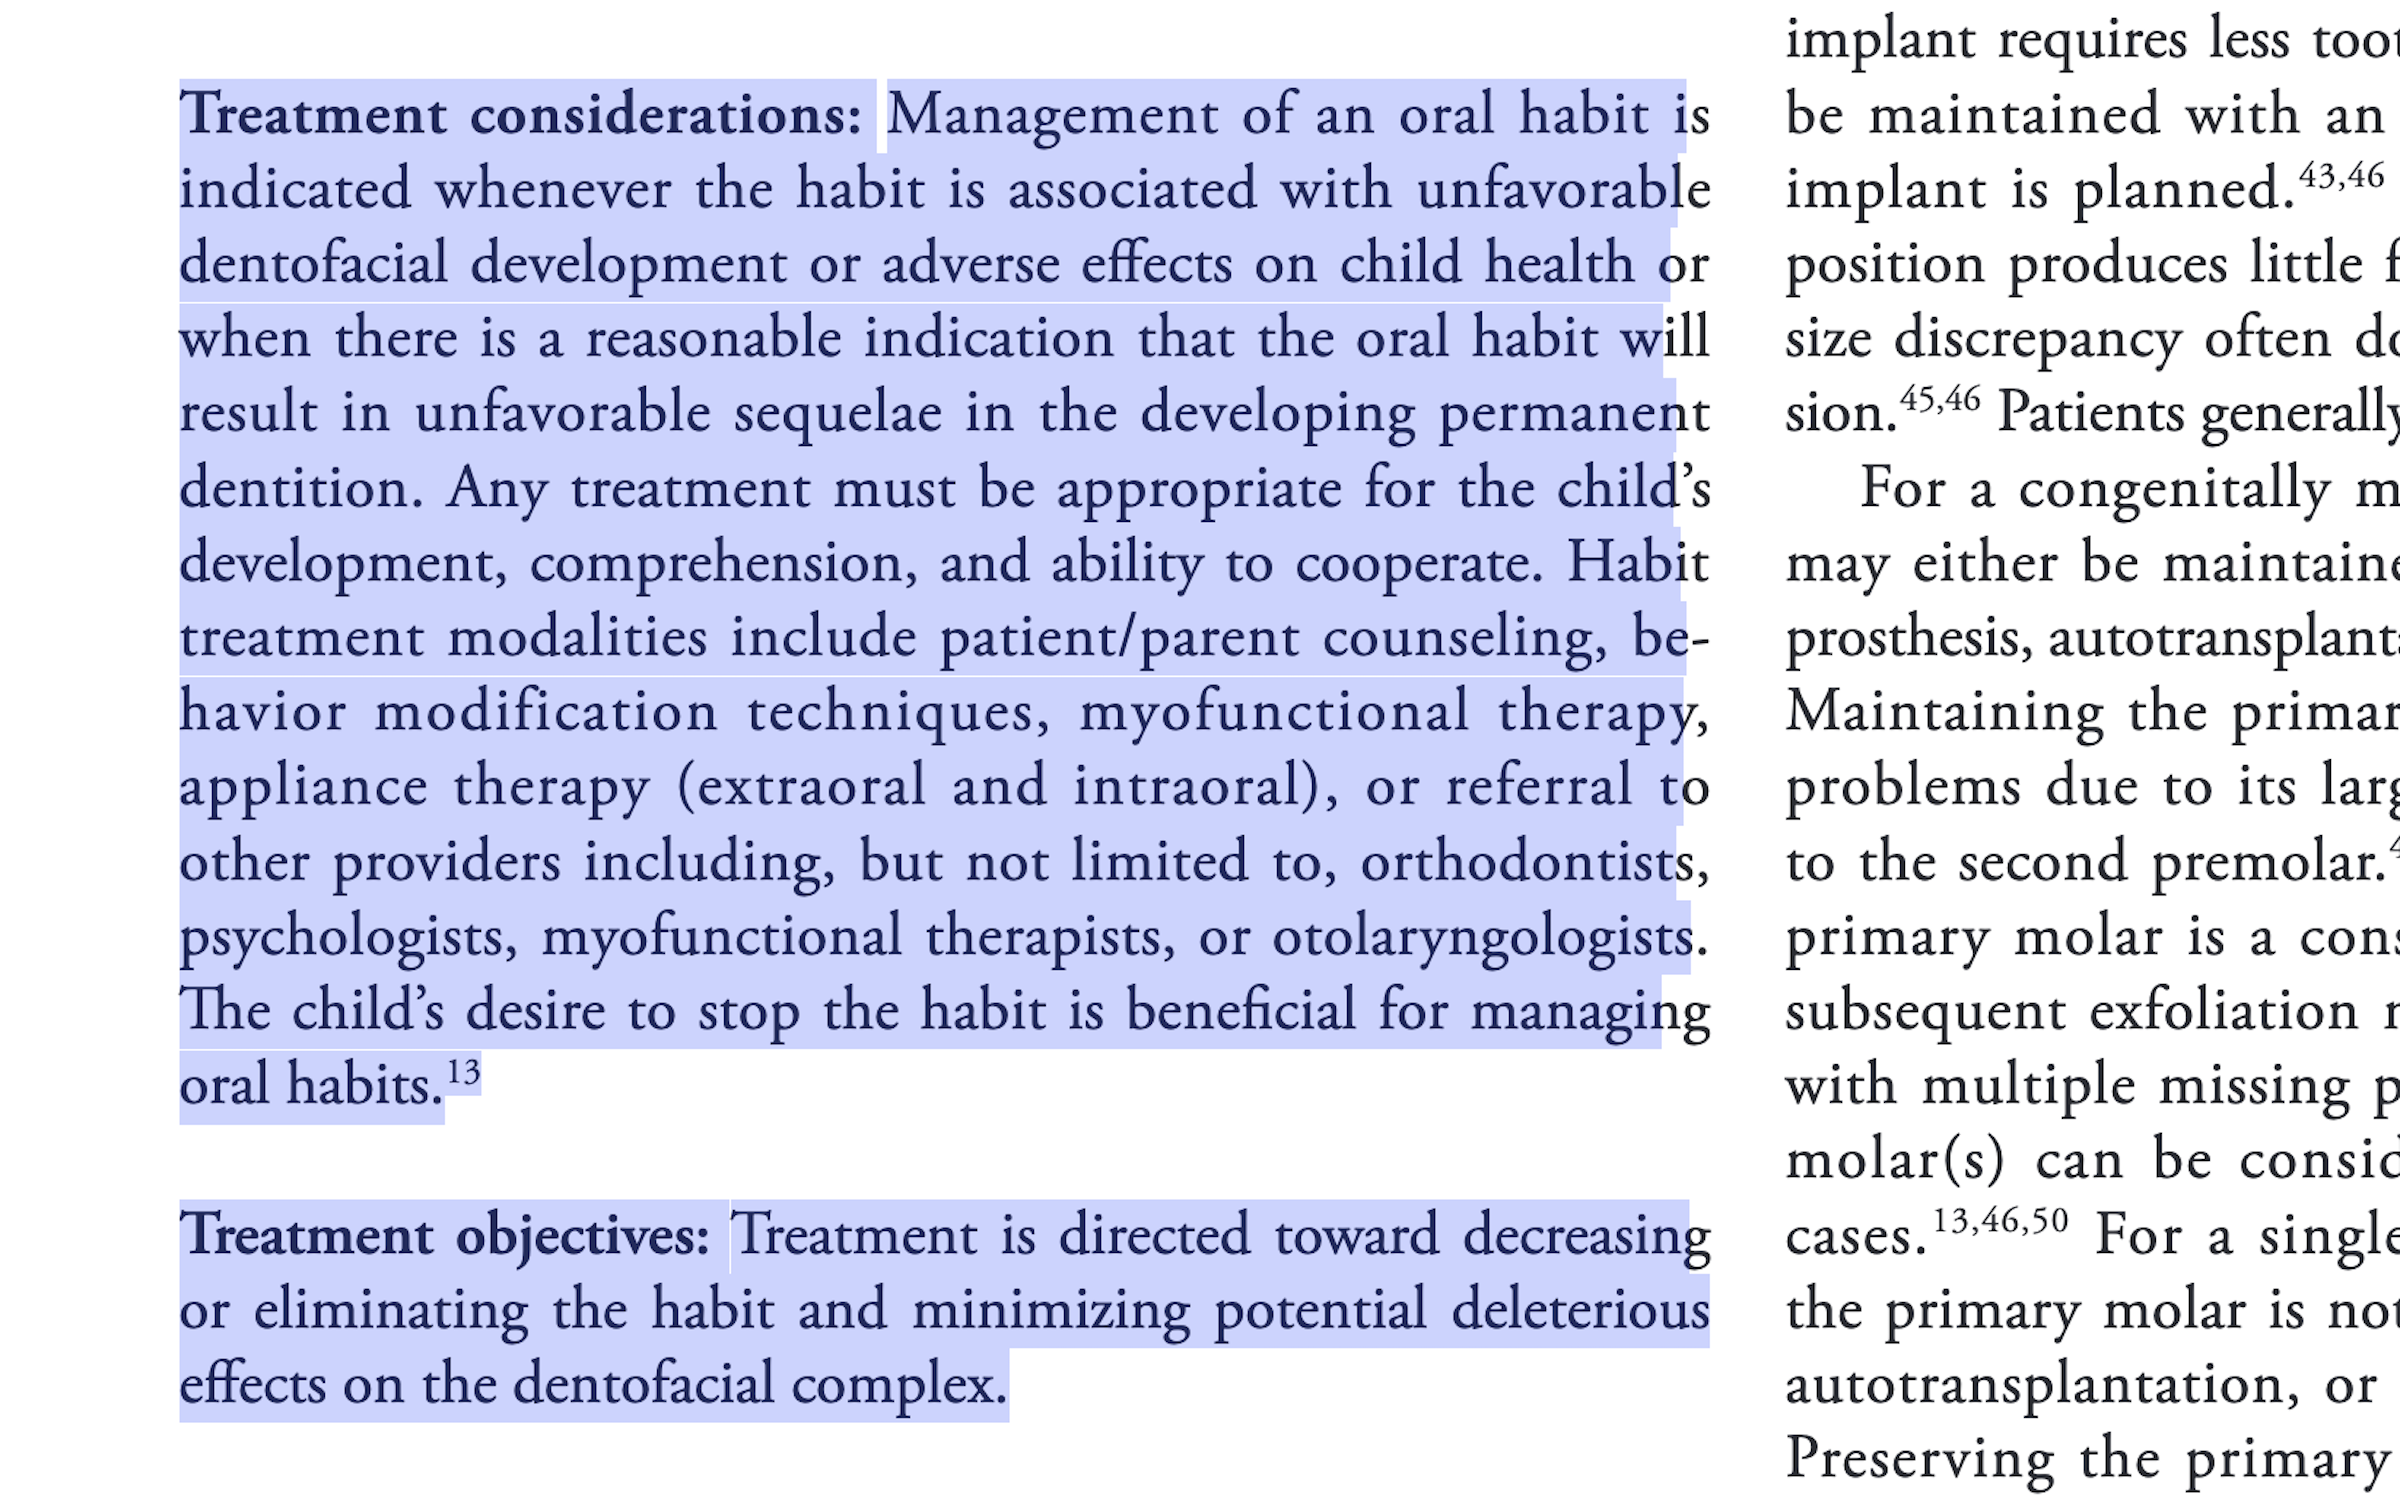 Myofunctional Therapy as a Treatment Consideration excerpt